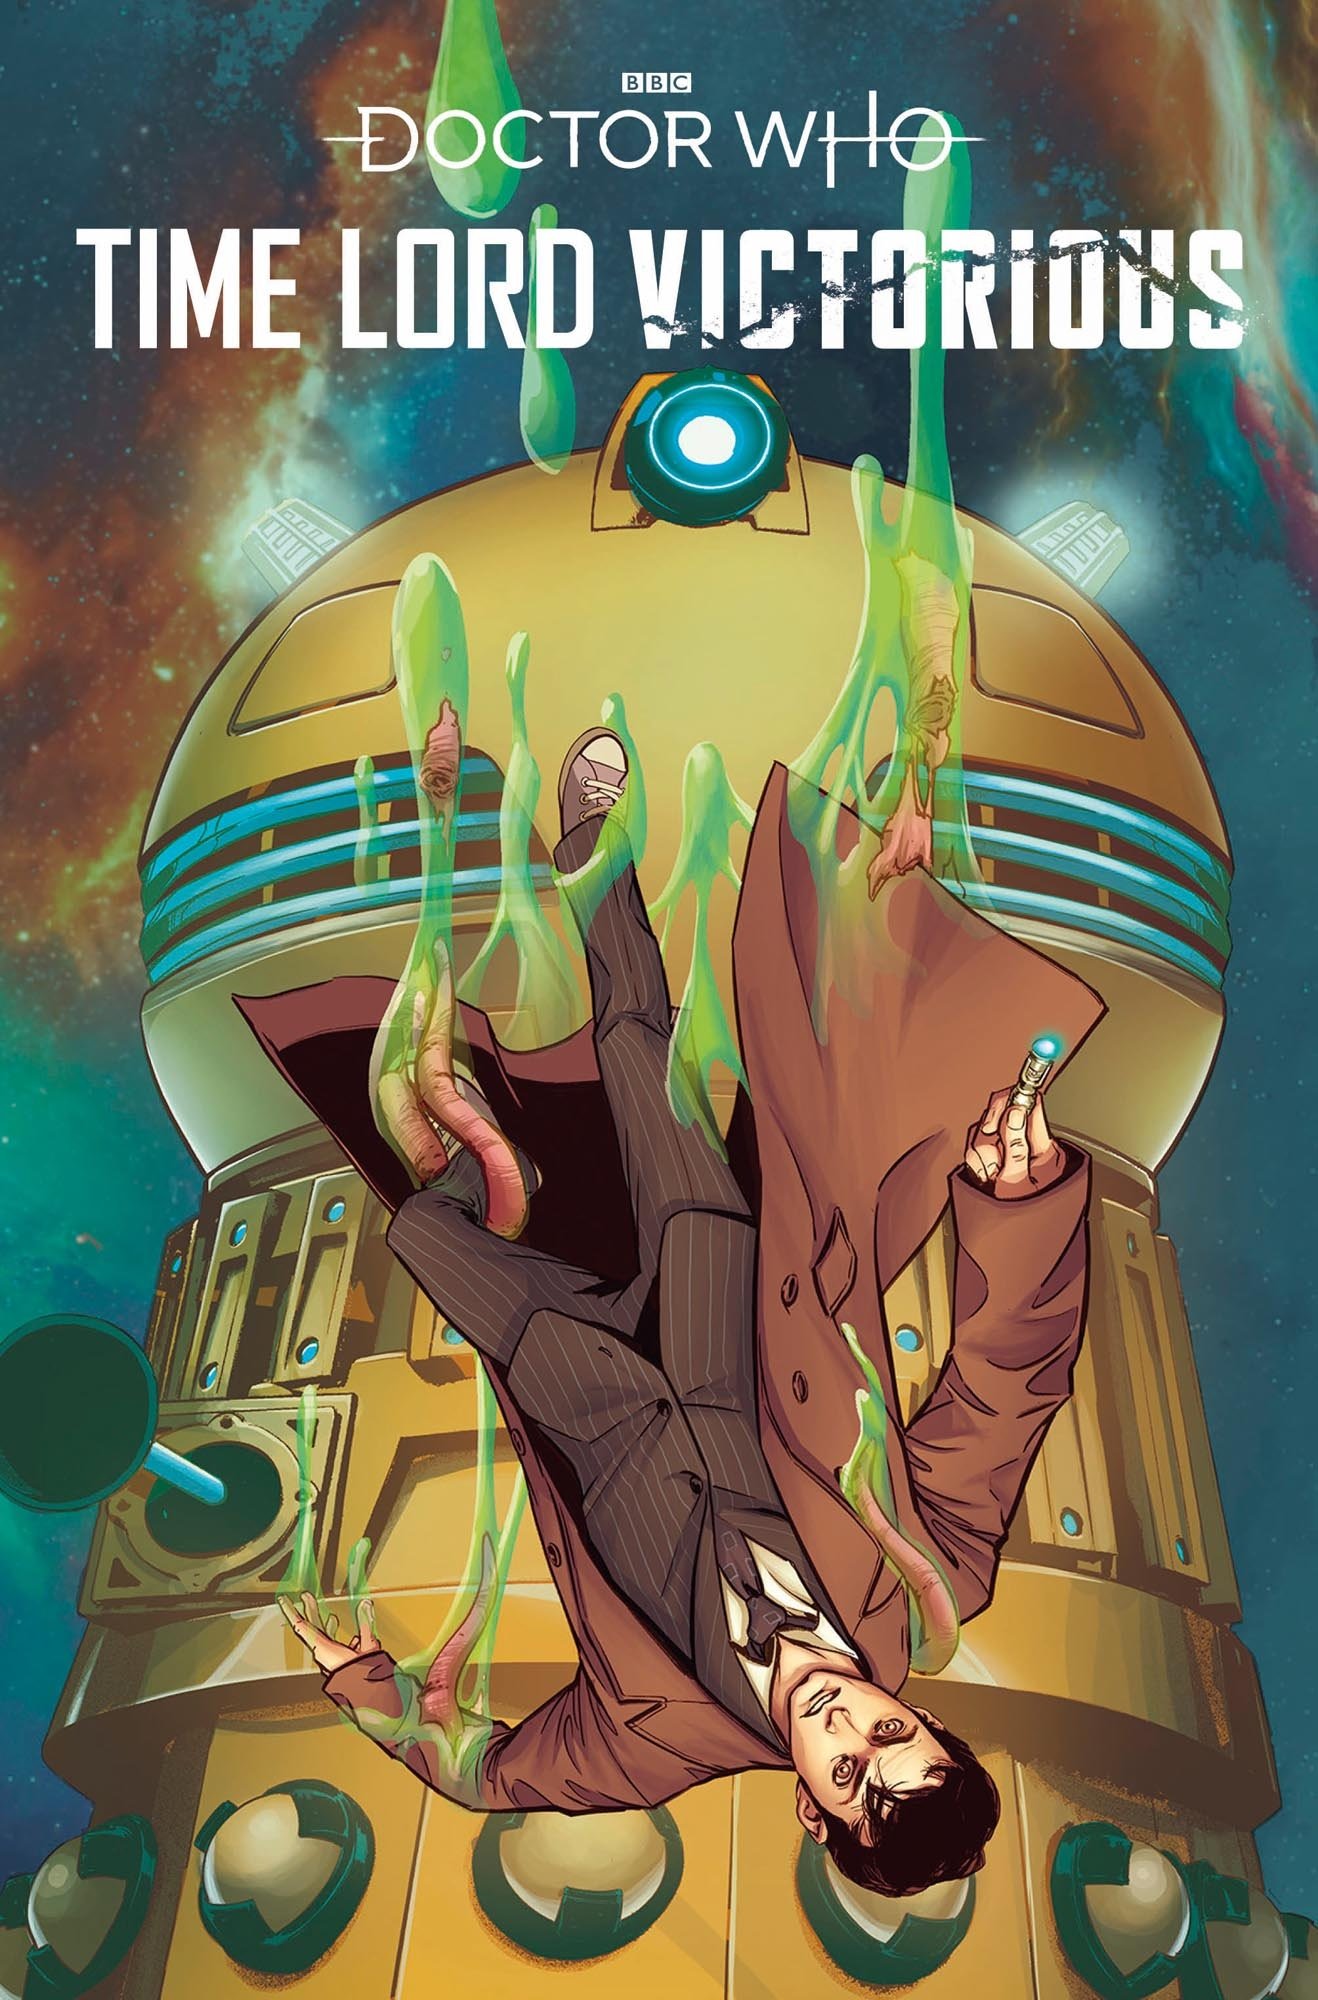 The Daleks Make Their Titan Comics Debut in Time Lord Victorious This September